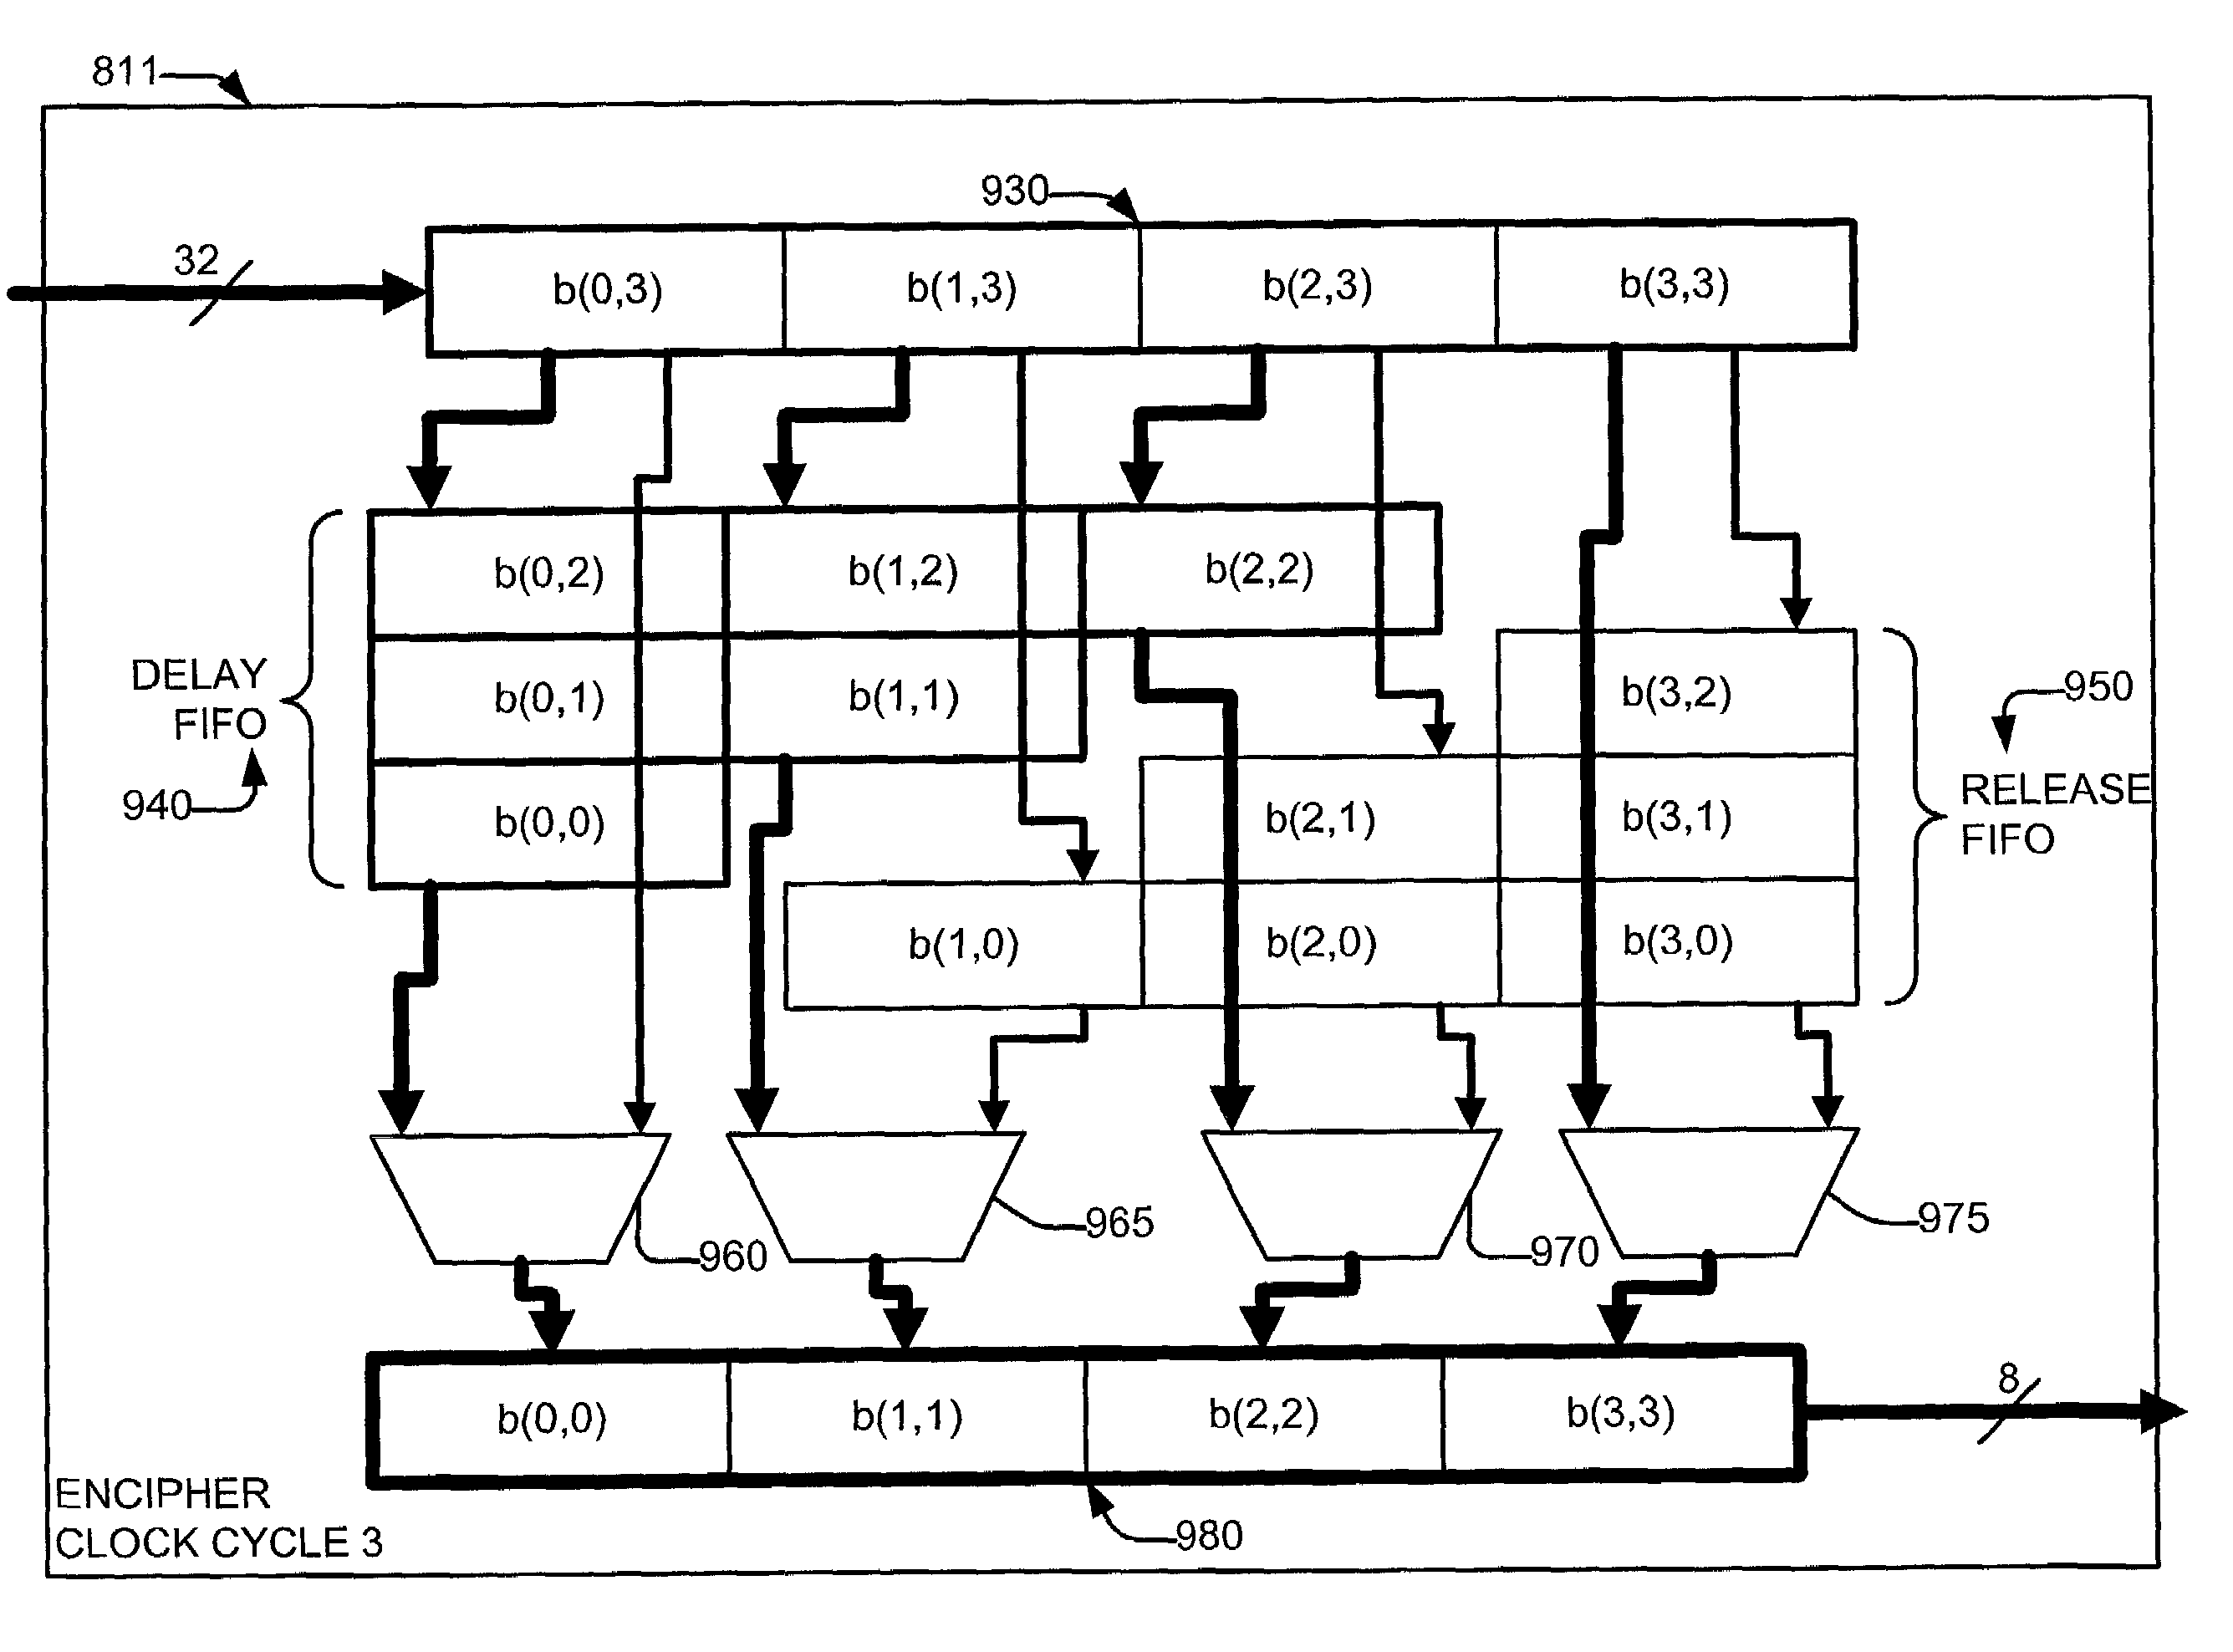 System and method for executing Advanced Encryption Standard (AES) algorithm